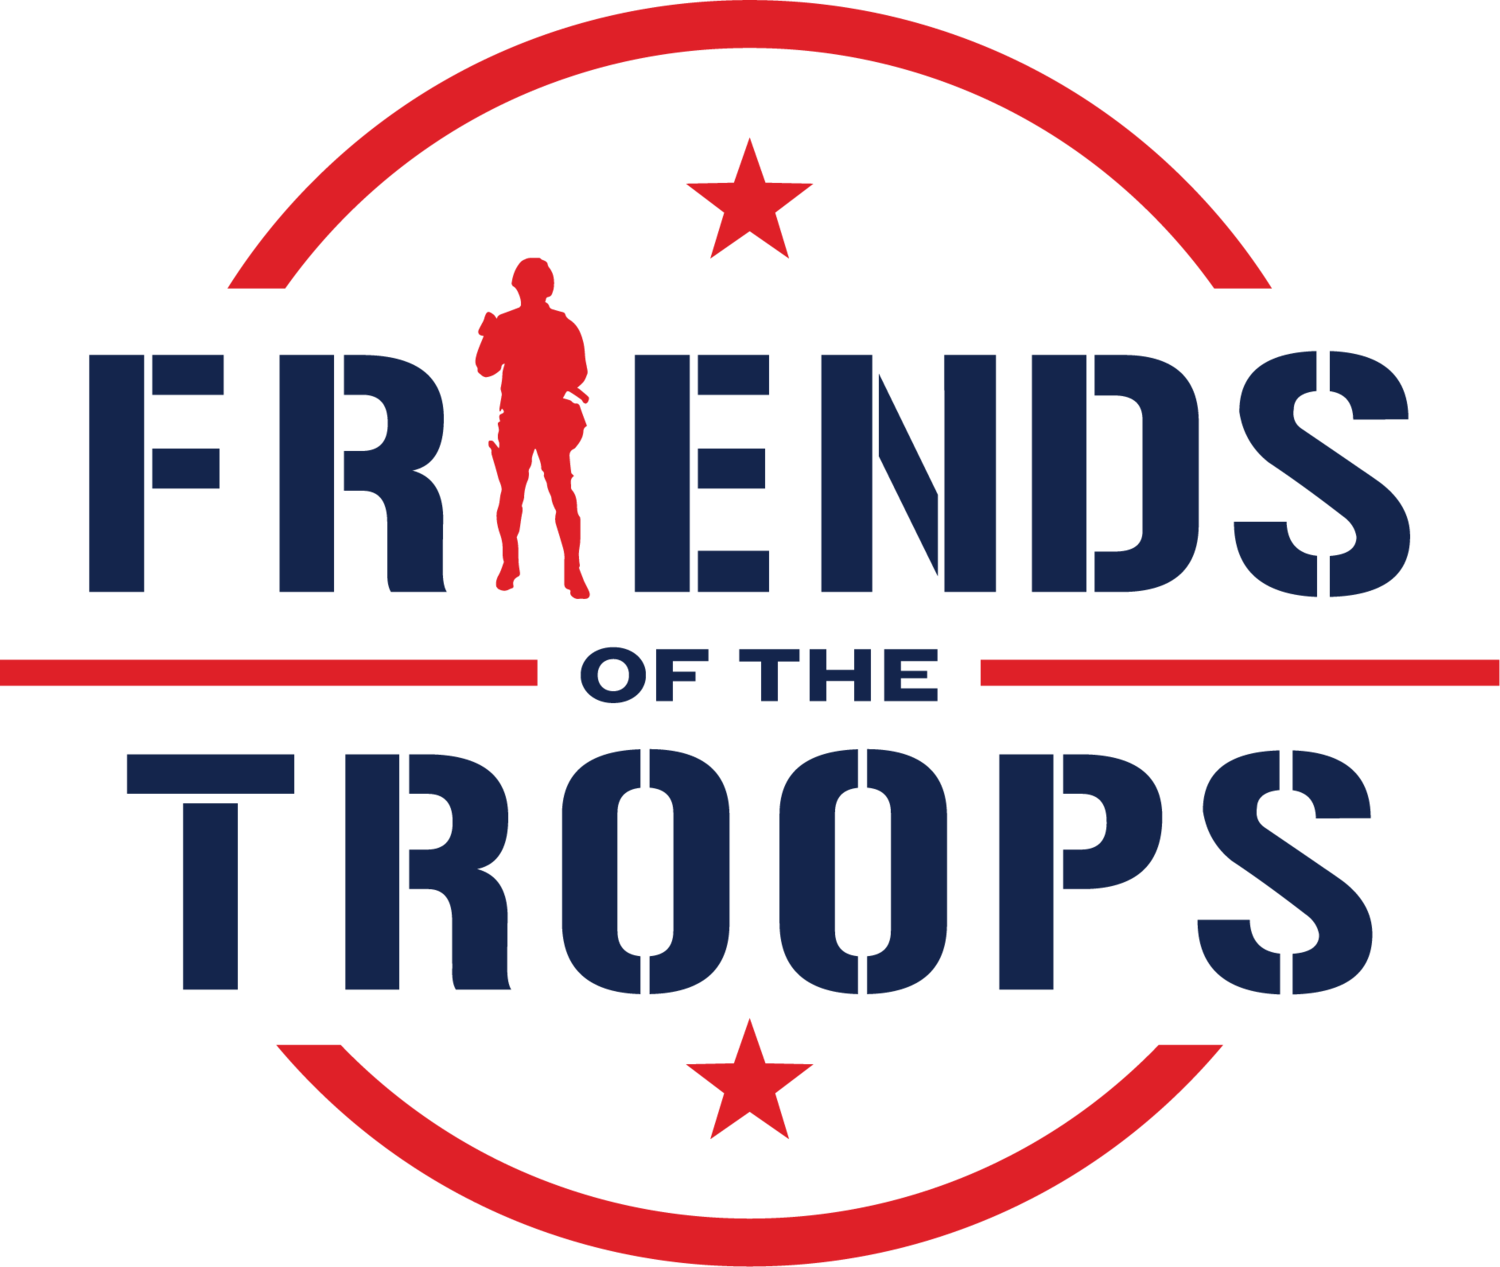 Friends Of The Troops